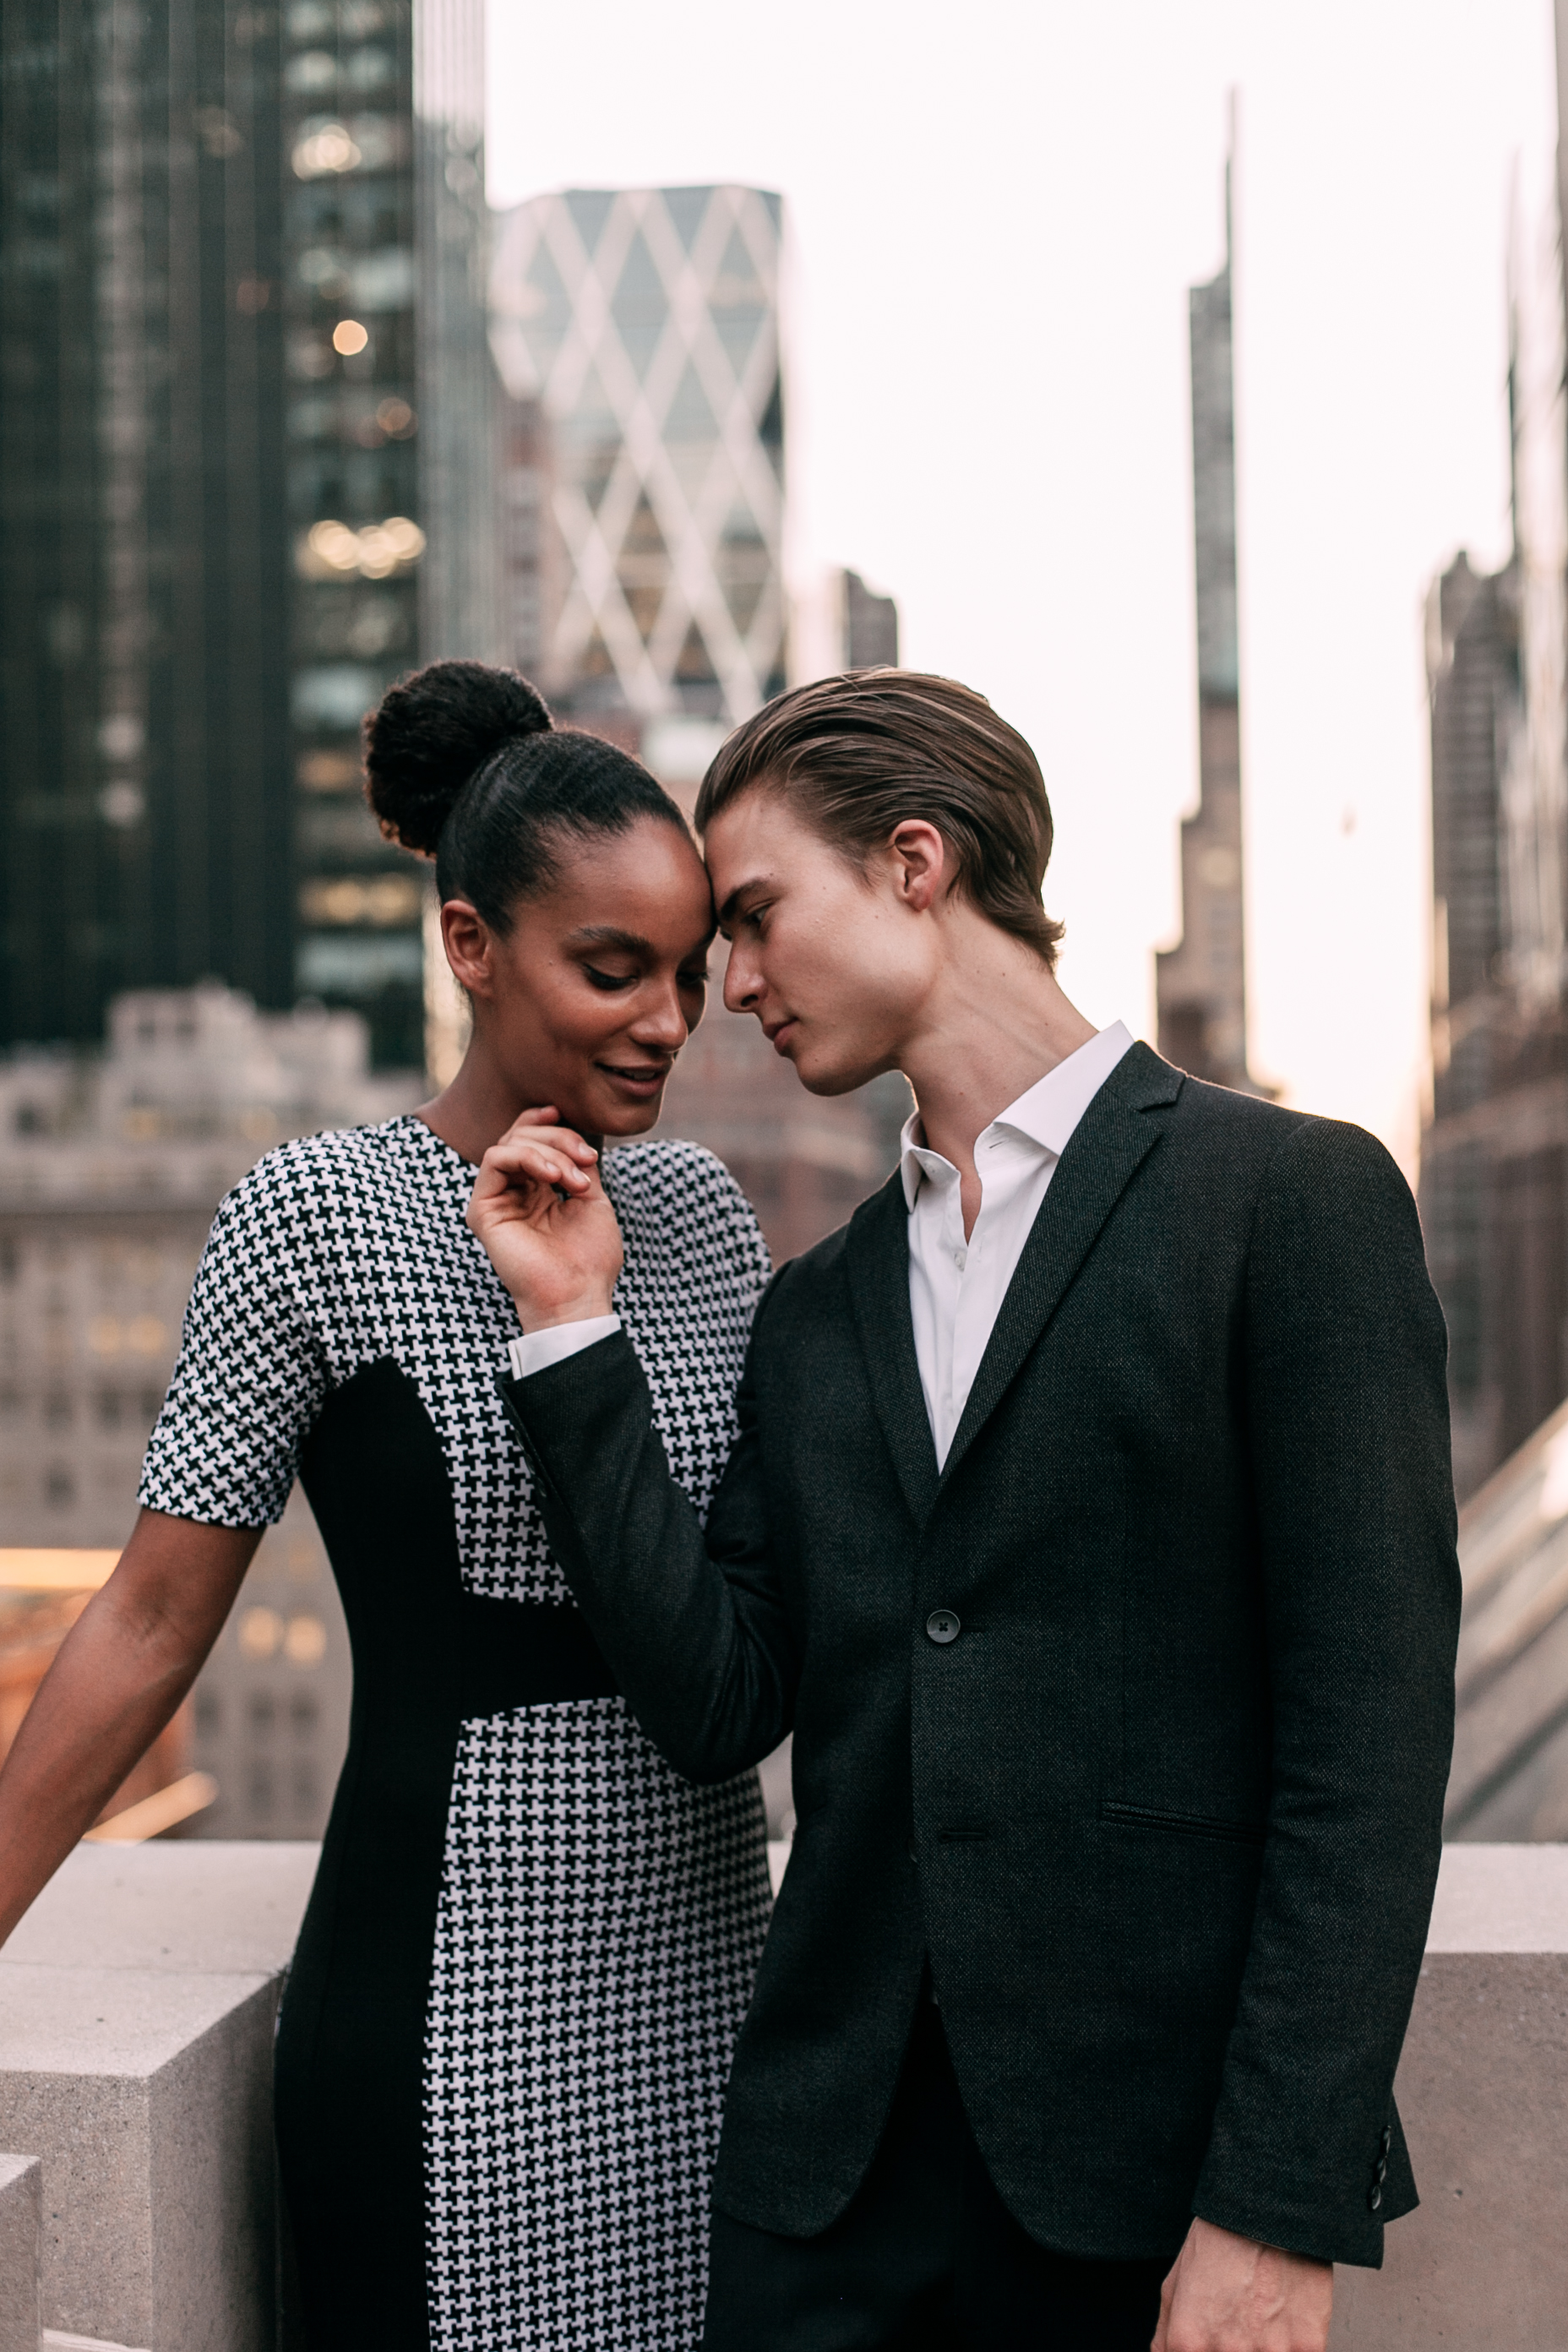 New York City engagement photographer, New York engagement photographer, NYC engagement photographer, NYC rooftop engagement session, interracial couple, New York rooftop engagement session